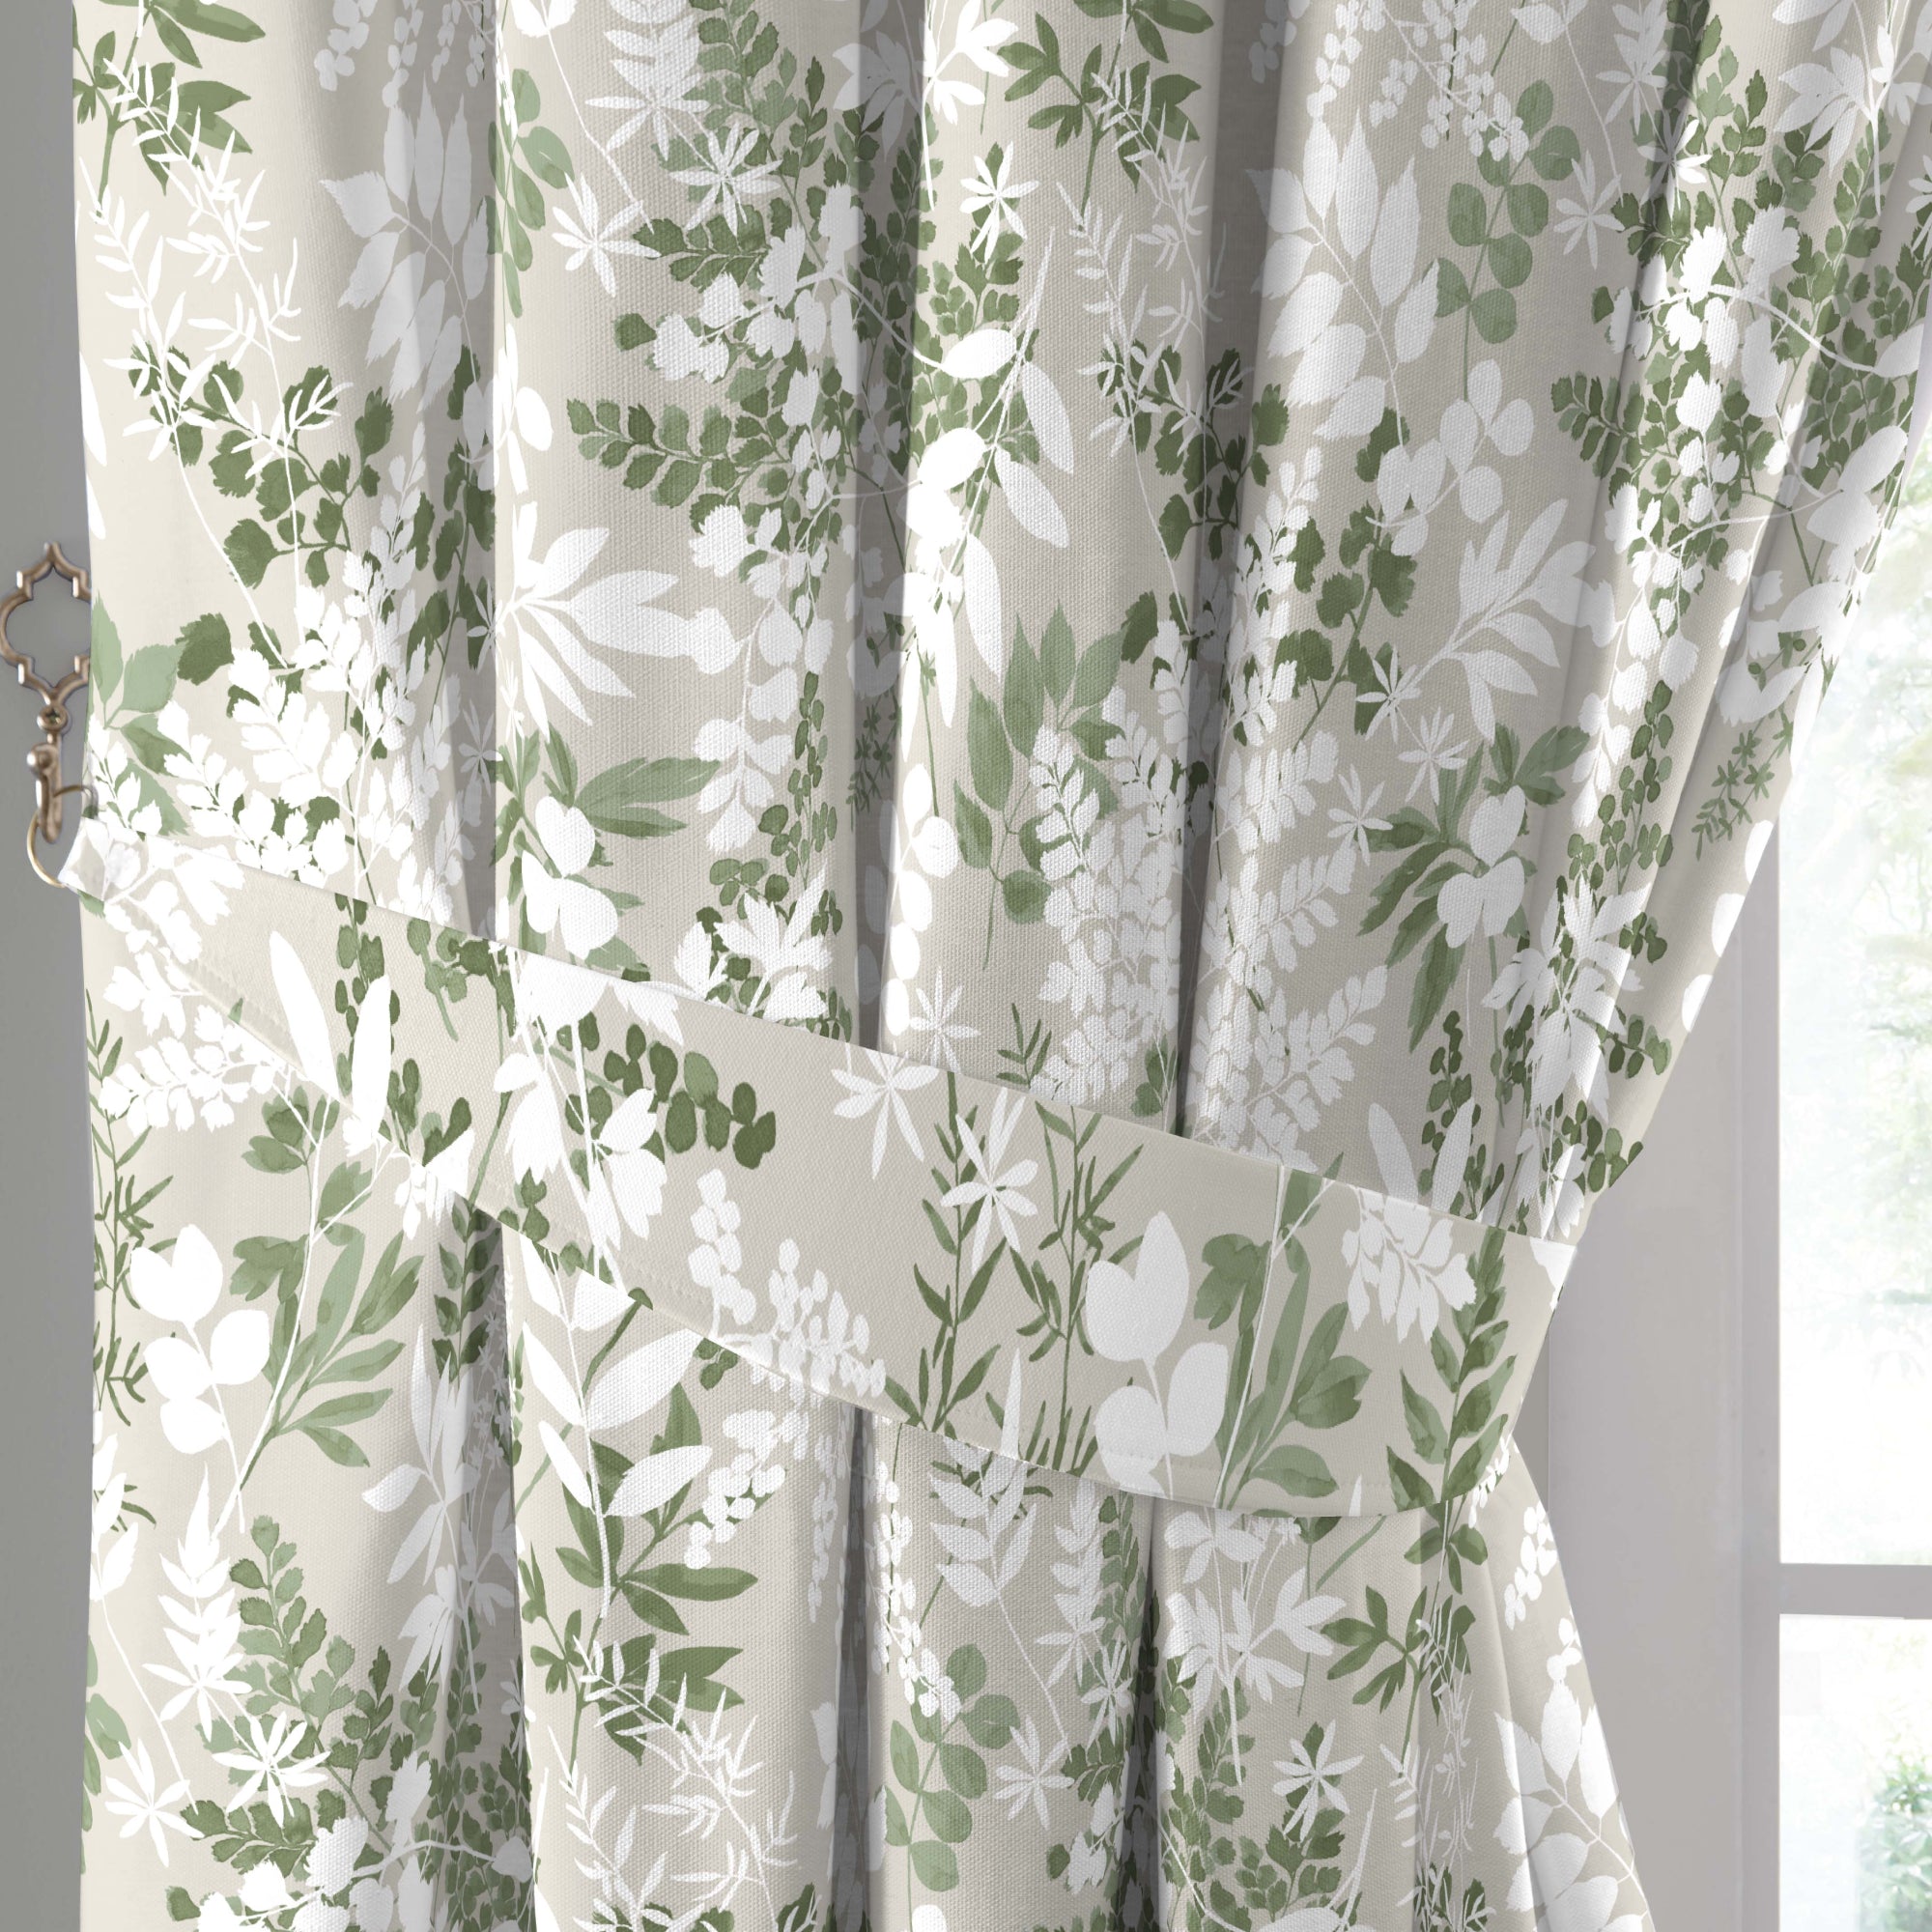 Voile Panel Tiverton by Dreams & Drapes Curtains in Green